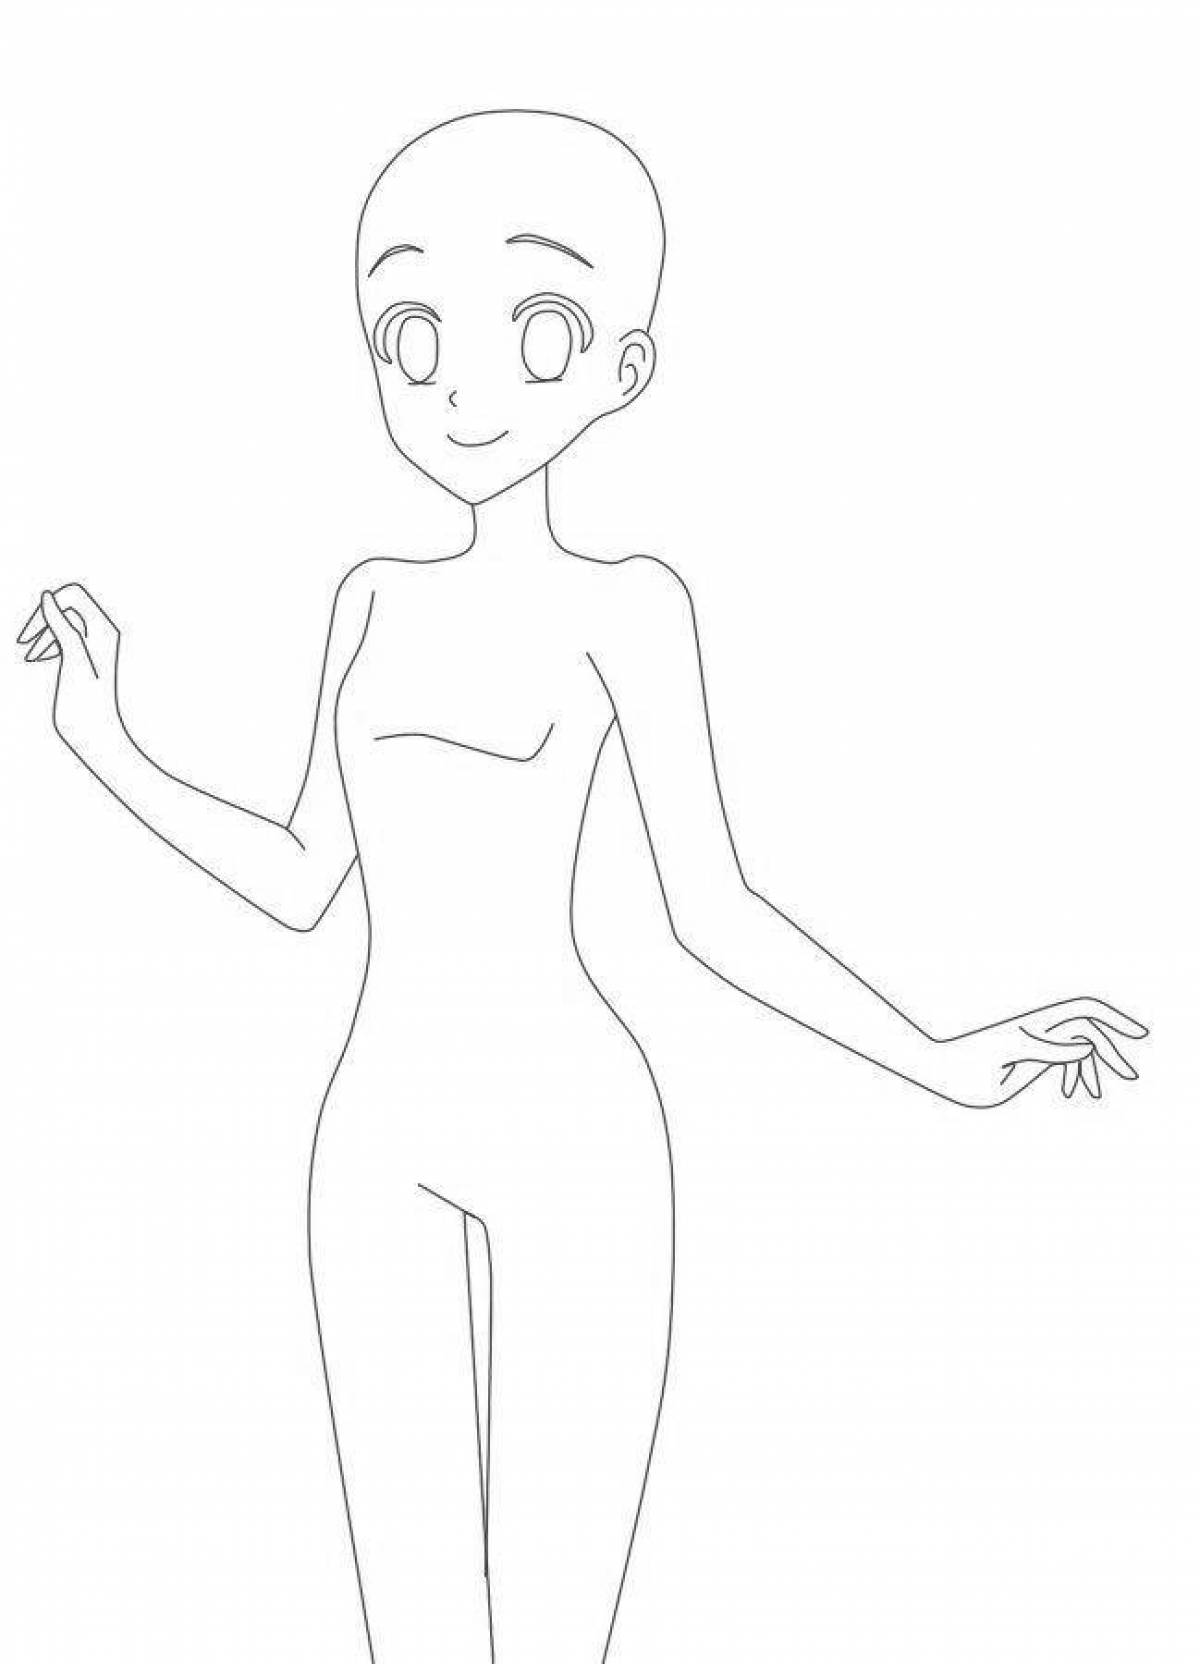 Fun body coloring page